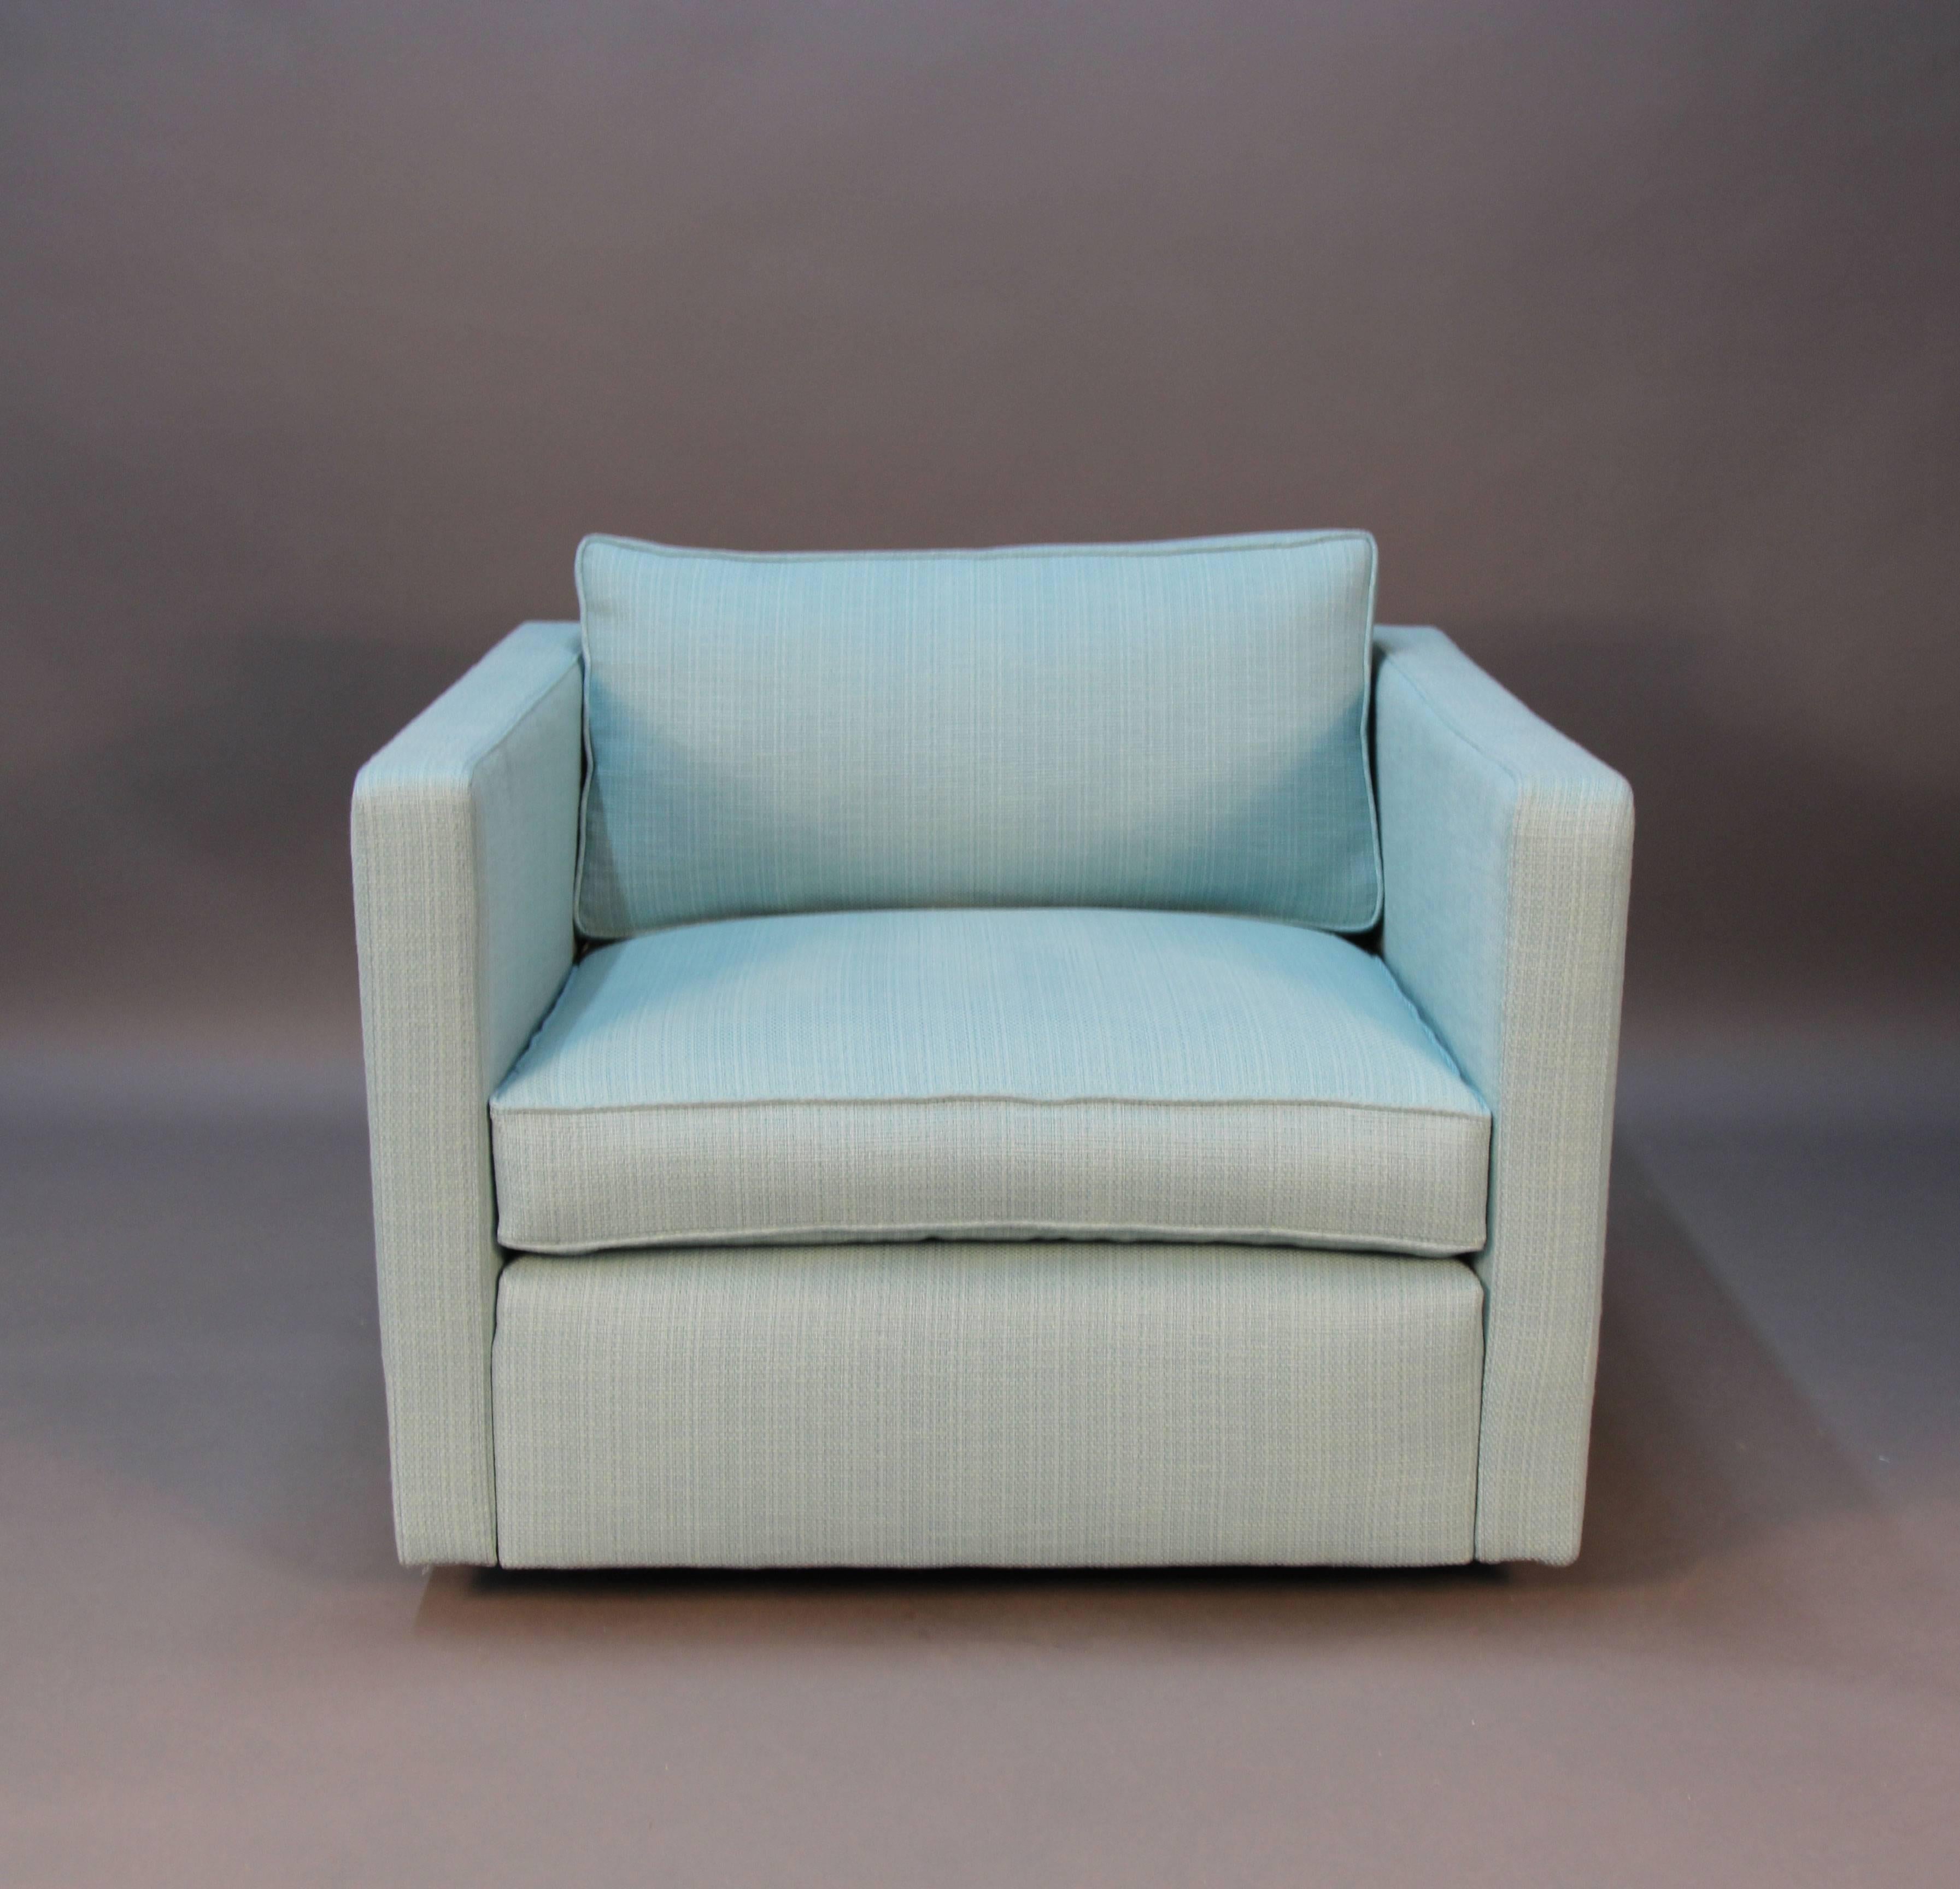 Beautiful aquamarine woven fabric on these newly upholstered pair of Knoll club chairs.  Clean mid century modern lines, cube chairs.

After earning a B.A. in Architecture from the University of California, Charles Pfister worked on the staff of